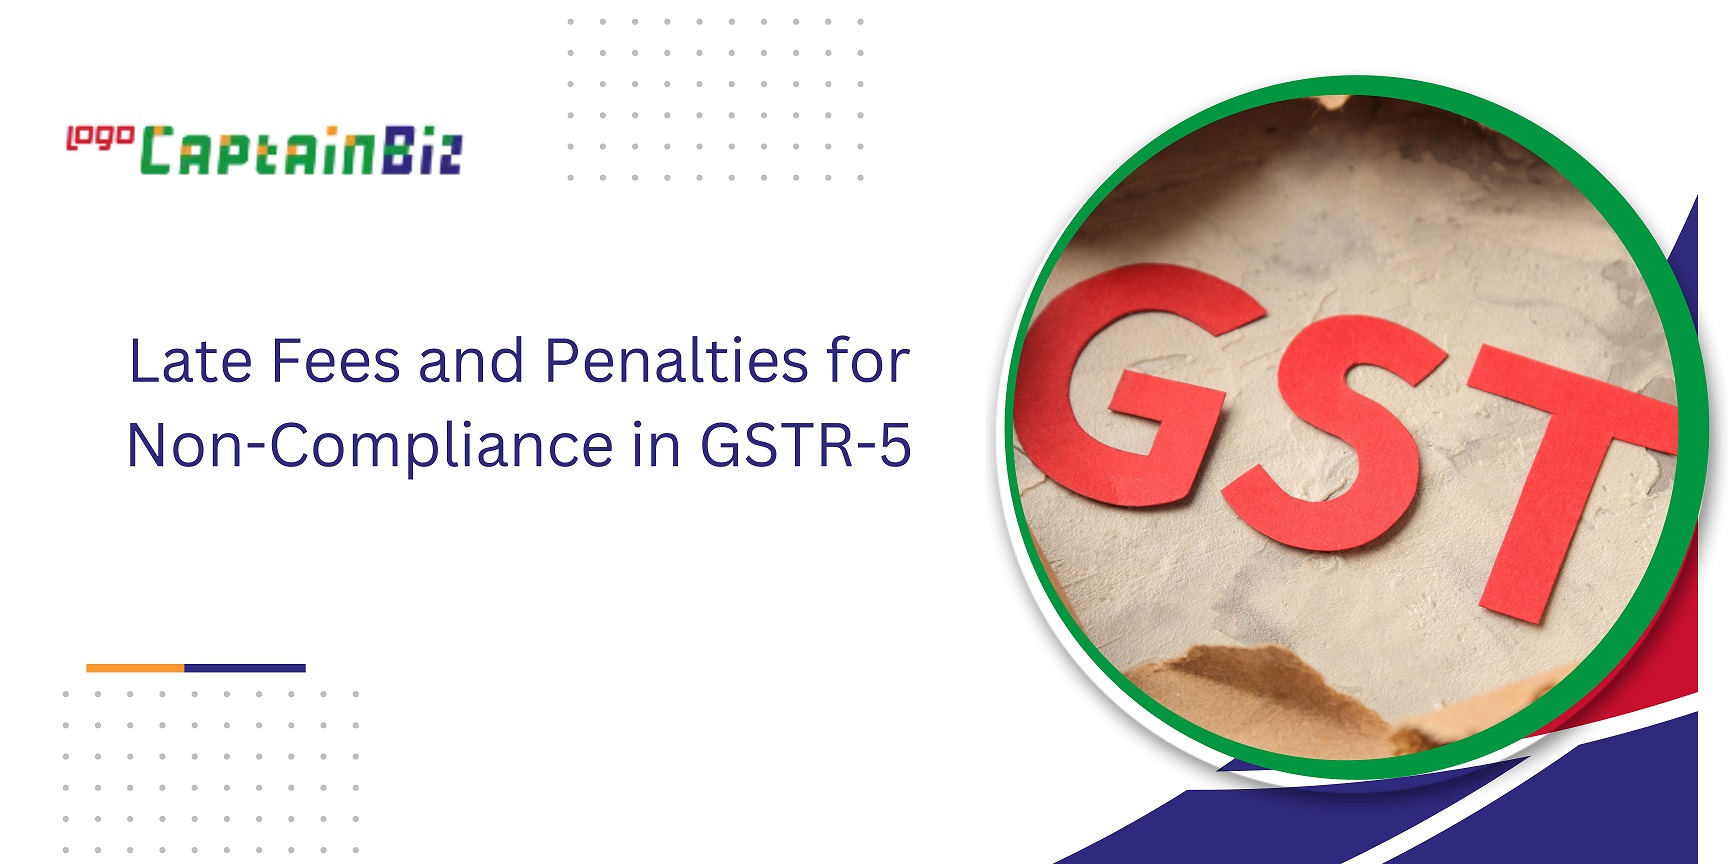 CaptainBiz: Late Fees and Penalties for Non-Compliance in GSTR-5